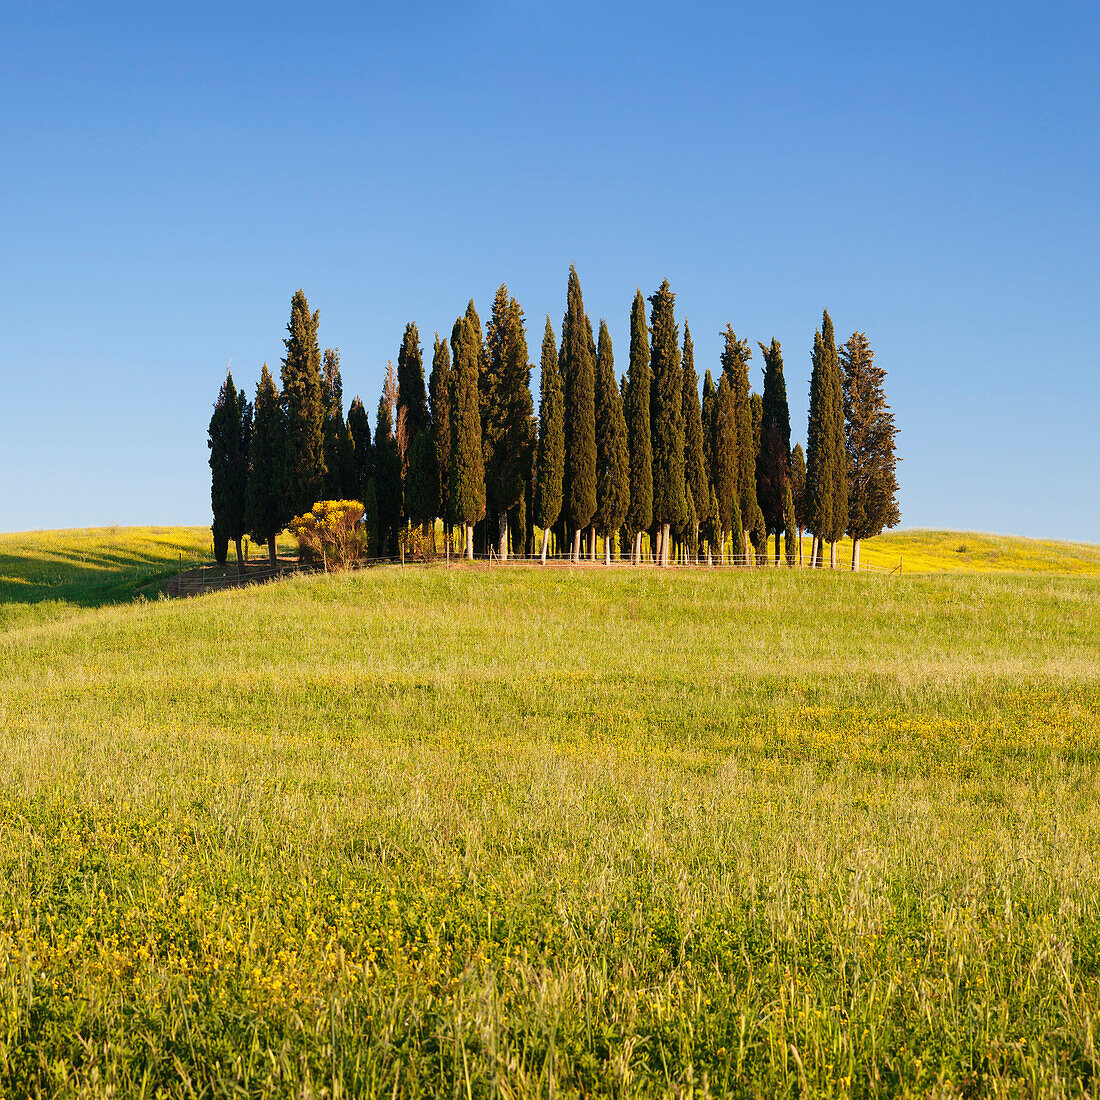 Group of cypress trees, near San Quirico, Val d'Orcia Orcia Valley, UNESCO World Heritage Site, Siena Province, Tuscany, Italy, Europe